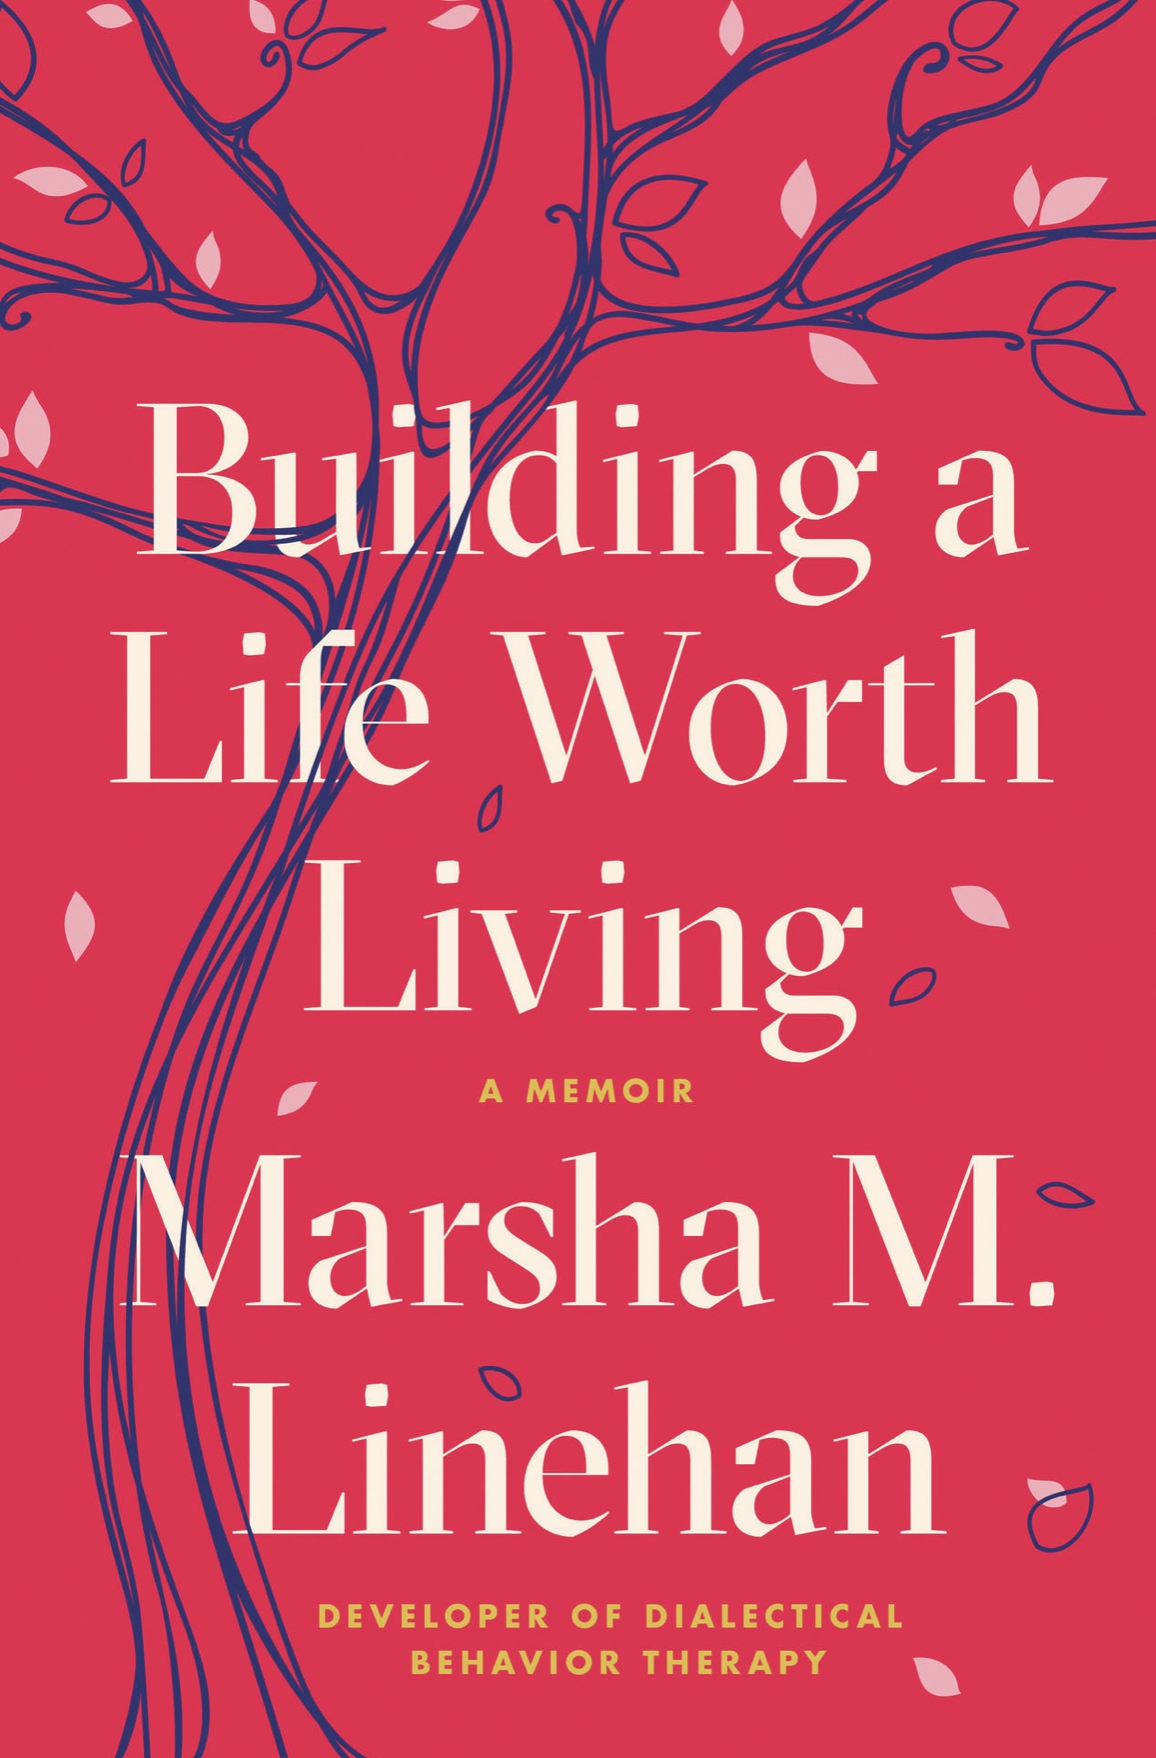 bpd books: building a life worth living, a memoir by marsha linehan, developer of dialectical behavior therapy